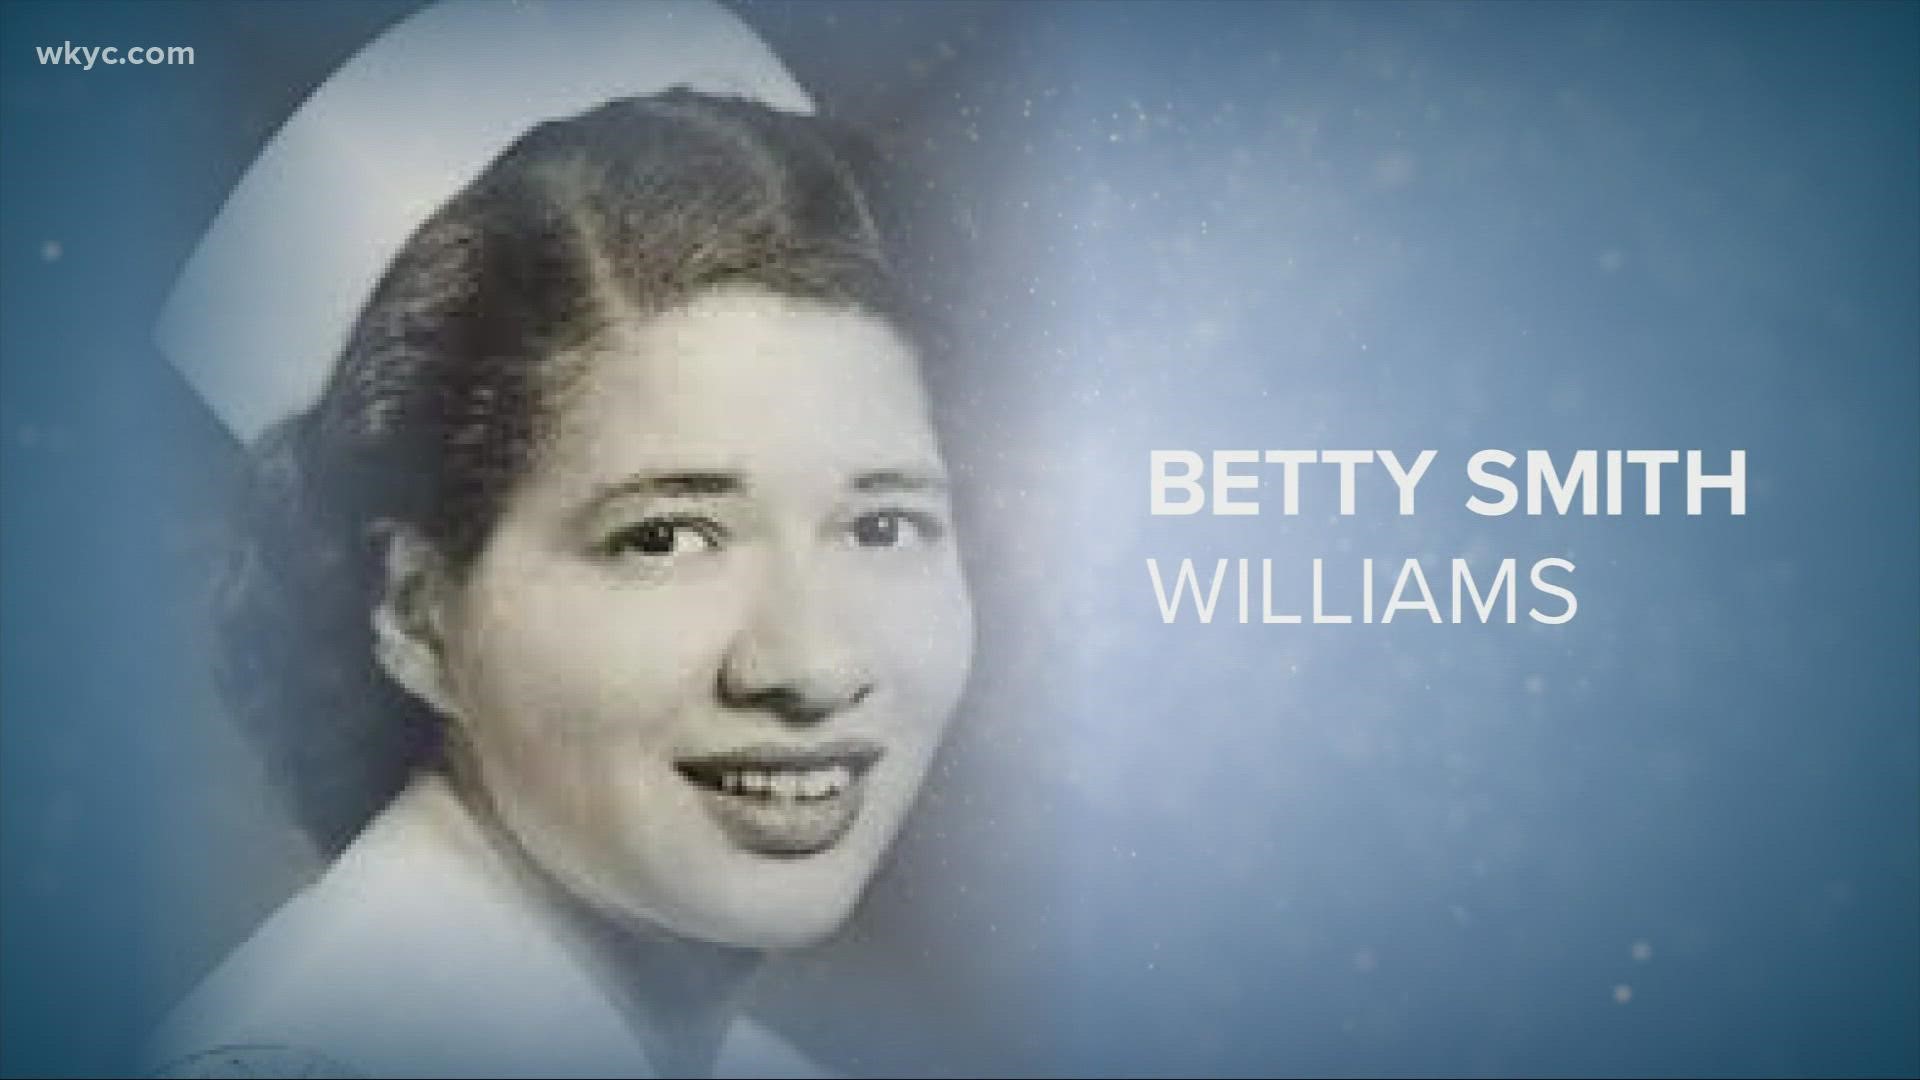 Today we honor Betty Smith Williams as we continue our Black History Month series.